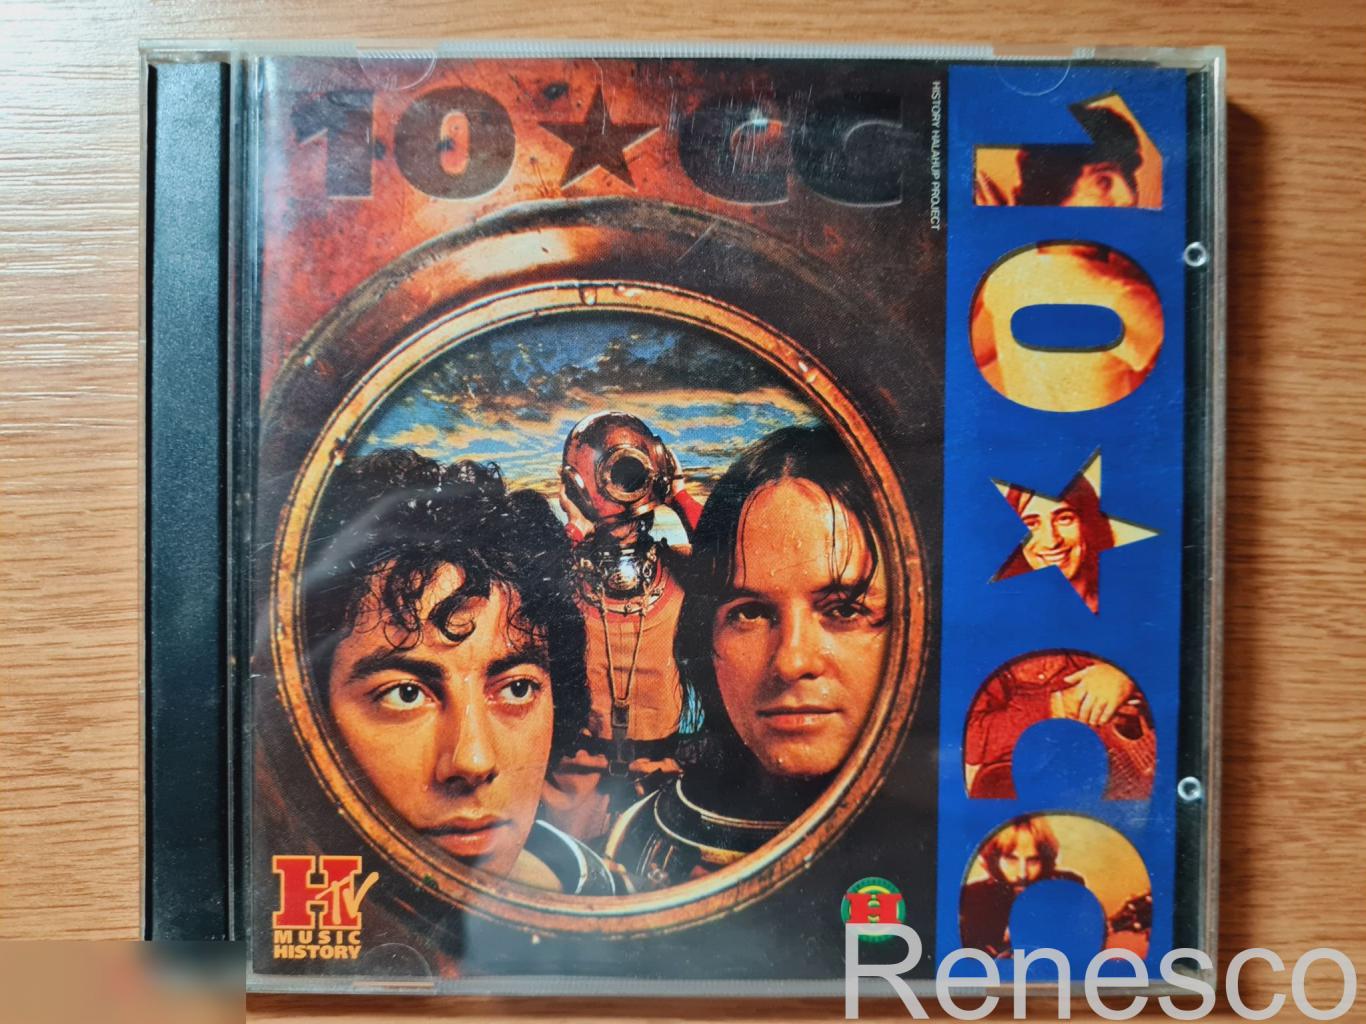 10cc – MTV Music History (Russia) (Unofficial Release)